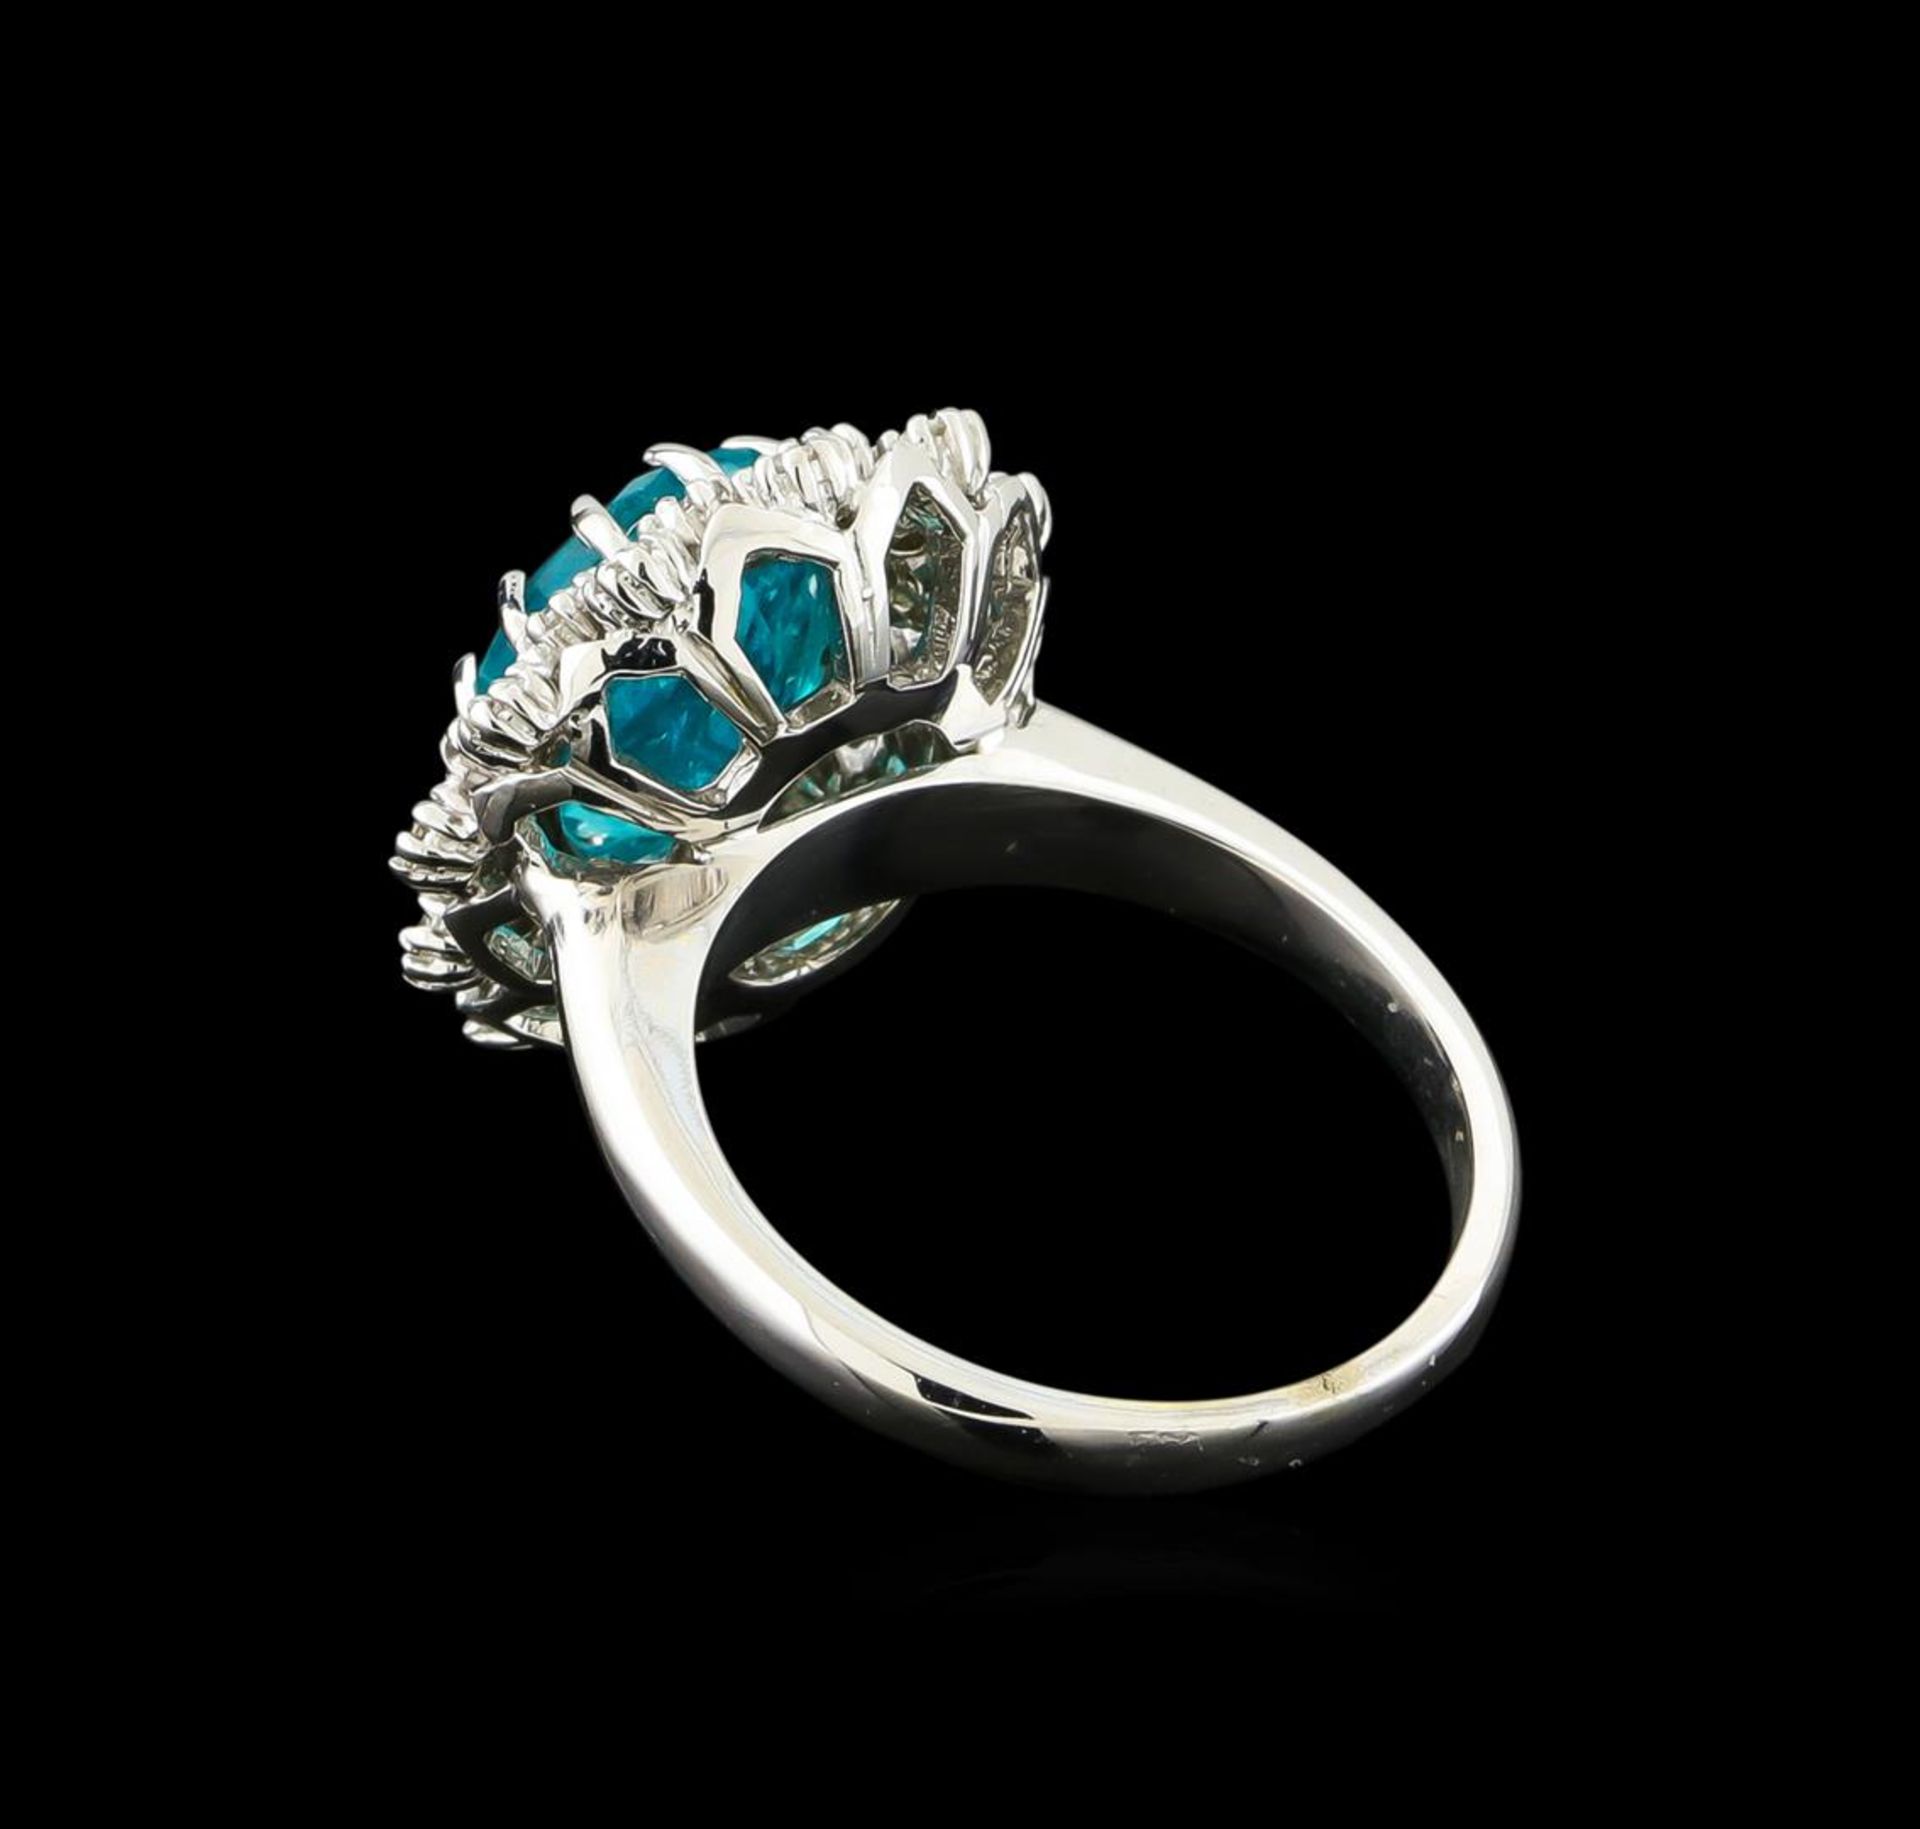 4.08 ctw Apatite and Diamond Ring - 14KT White Gold - Image 3 of 4